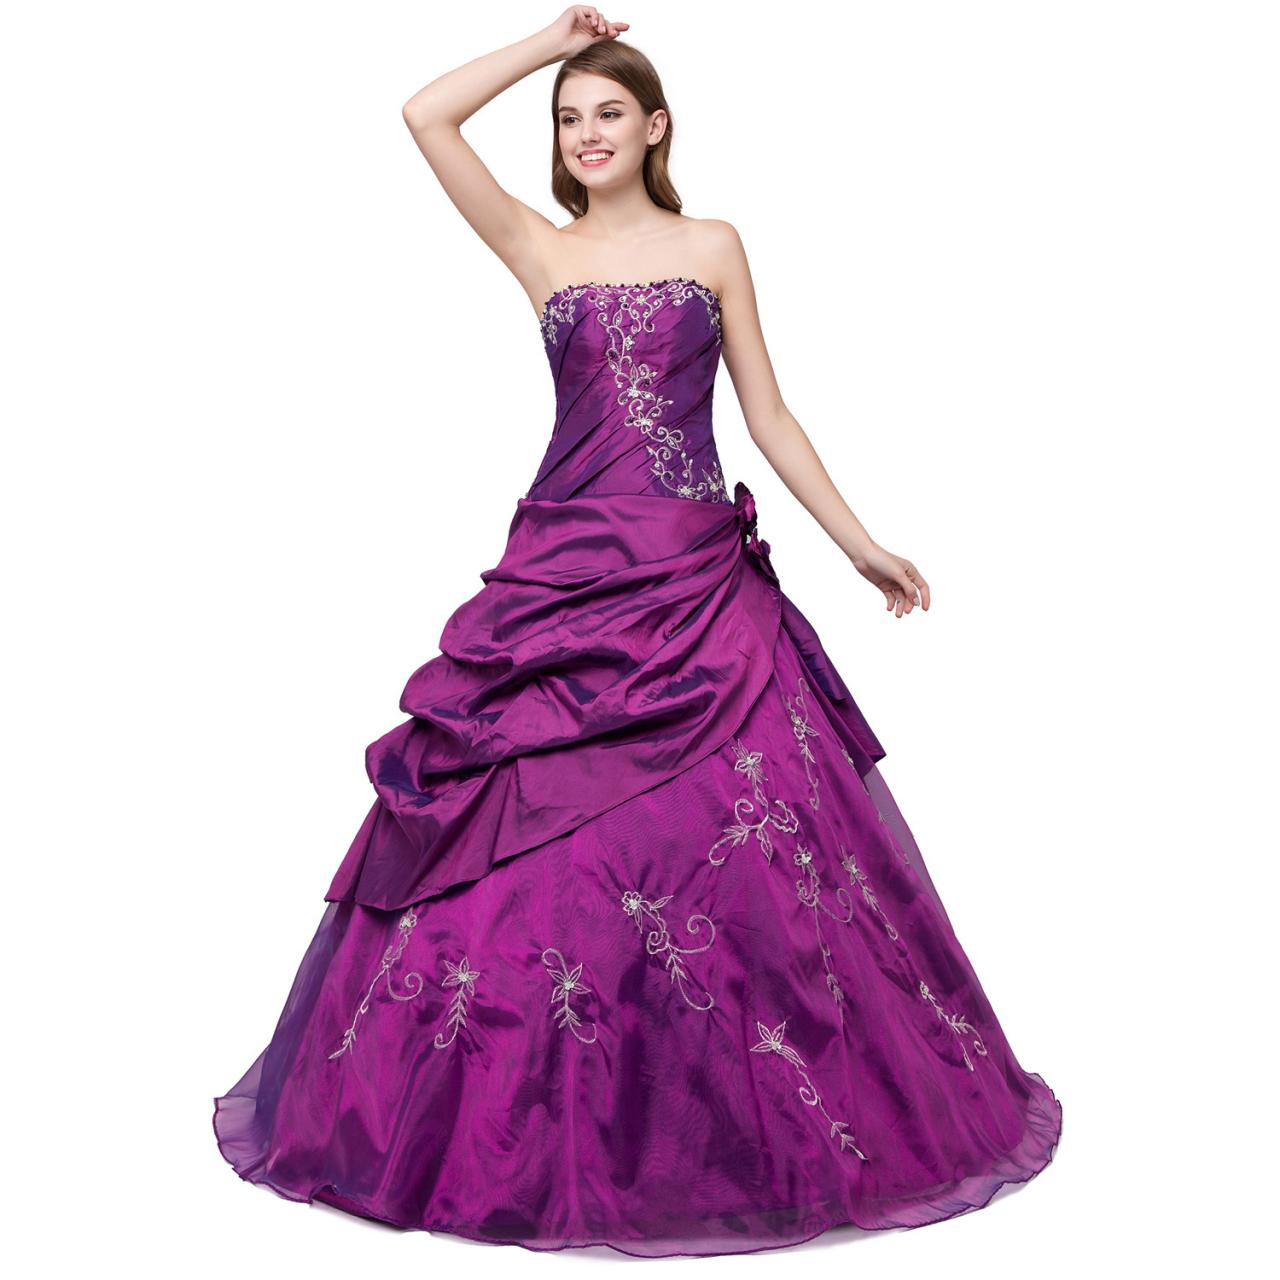 Elegant Long Purple Organza Prom Gown Featuring Embroidered And Beaded Embellished Sweetheart Bodice, Ball Gown, Formal Dresses